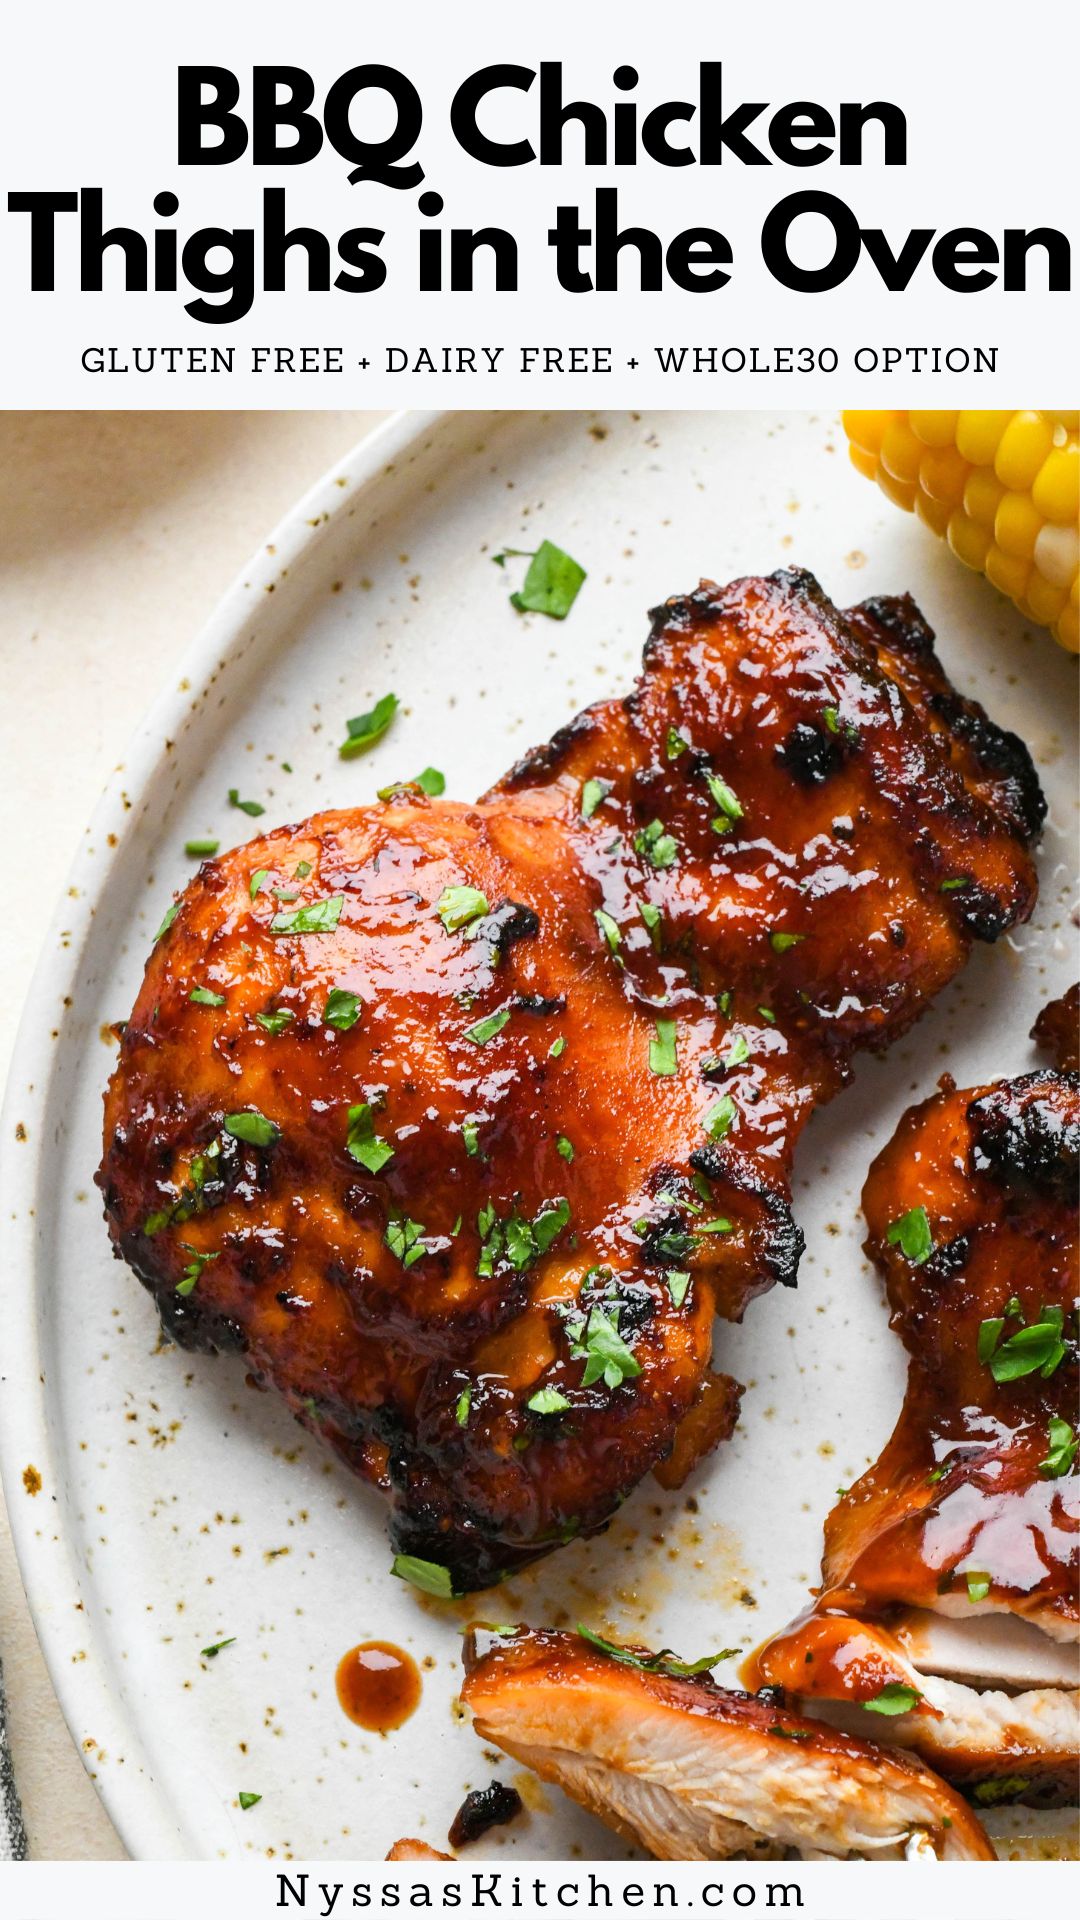 Delicious barbecue chicken is possible without a grill with this recipe for BBQ chicken thighs in the oven! Made with a boneless skinless chicken thighs, a simple seasoning blend, and your favorite bbq sauce. Sticky, lightly charred, and super easy to make. Gluten free, dairy free, Whole30 / paleo option.